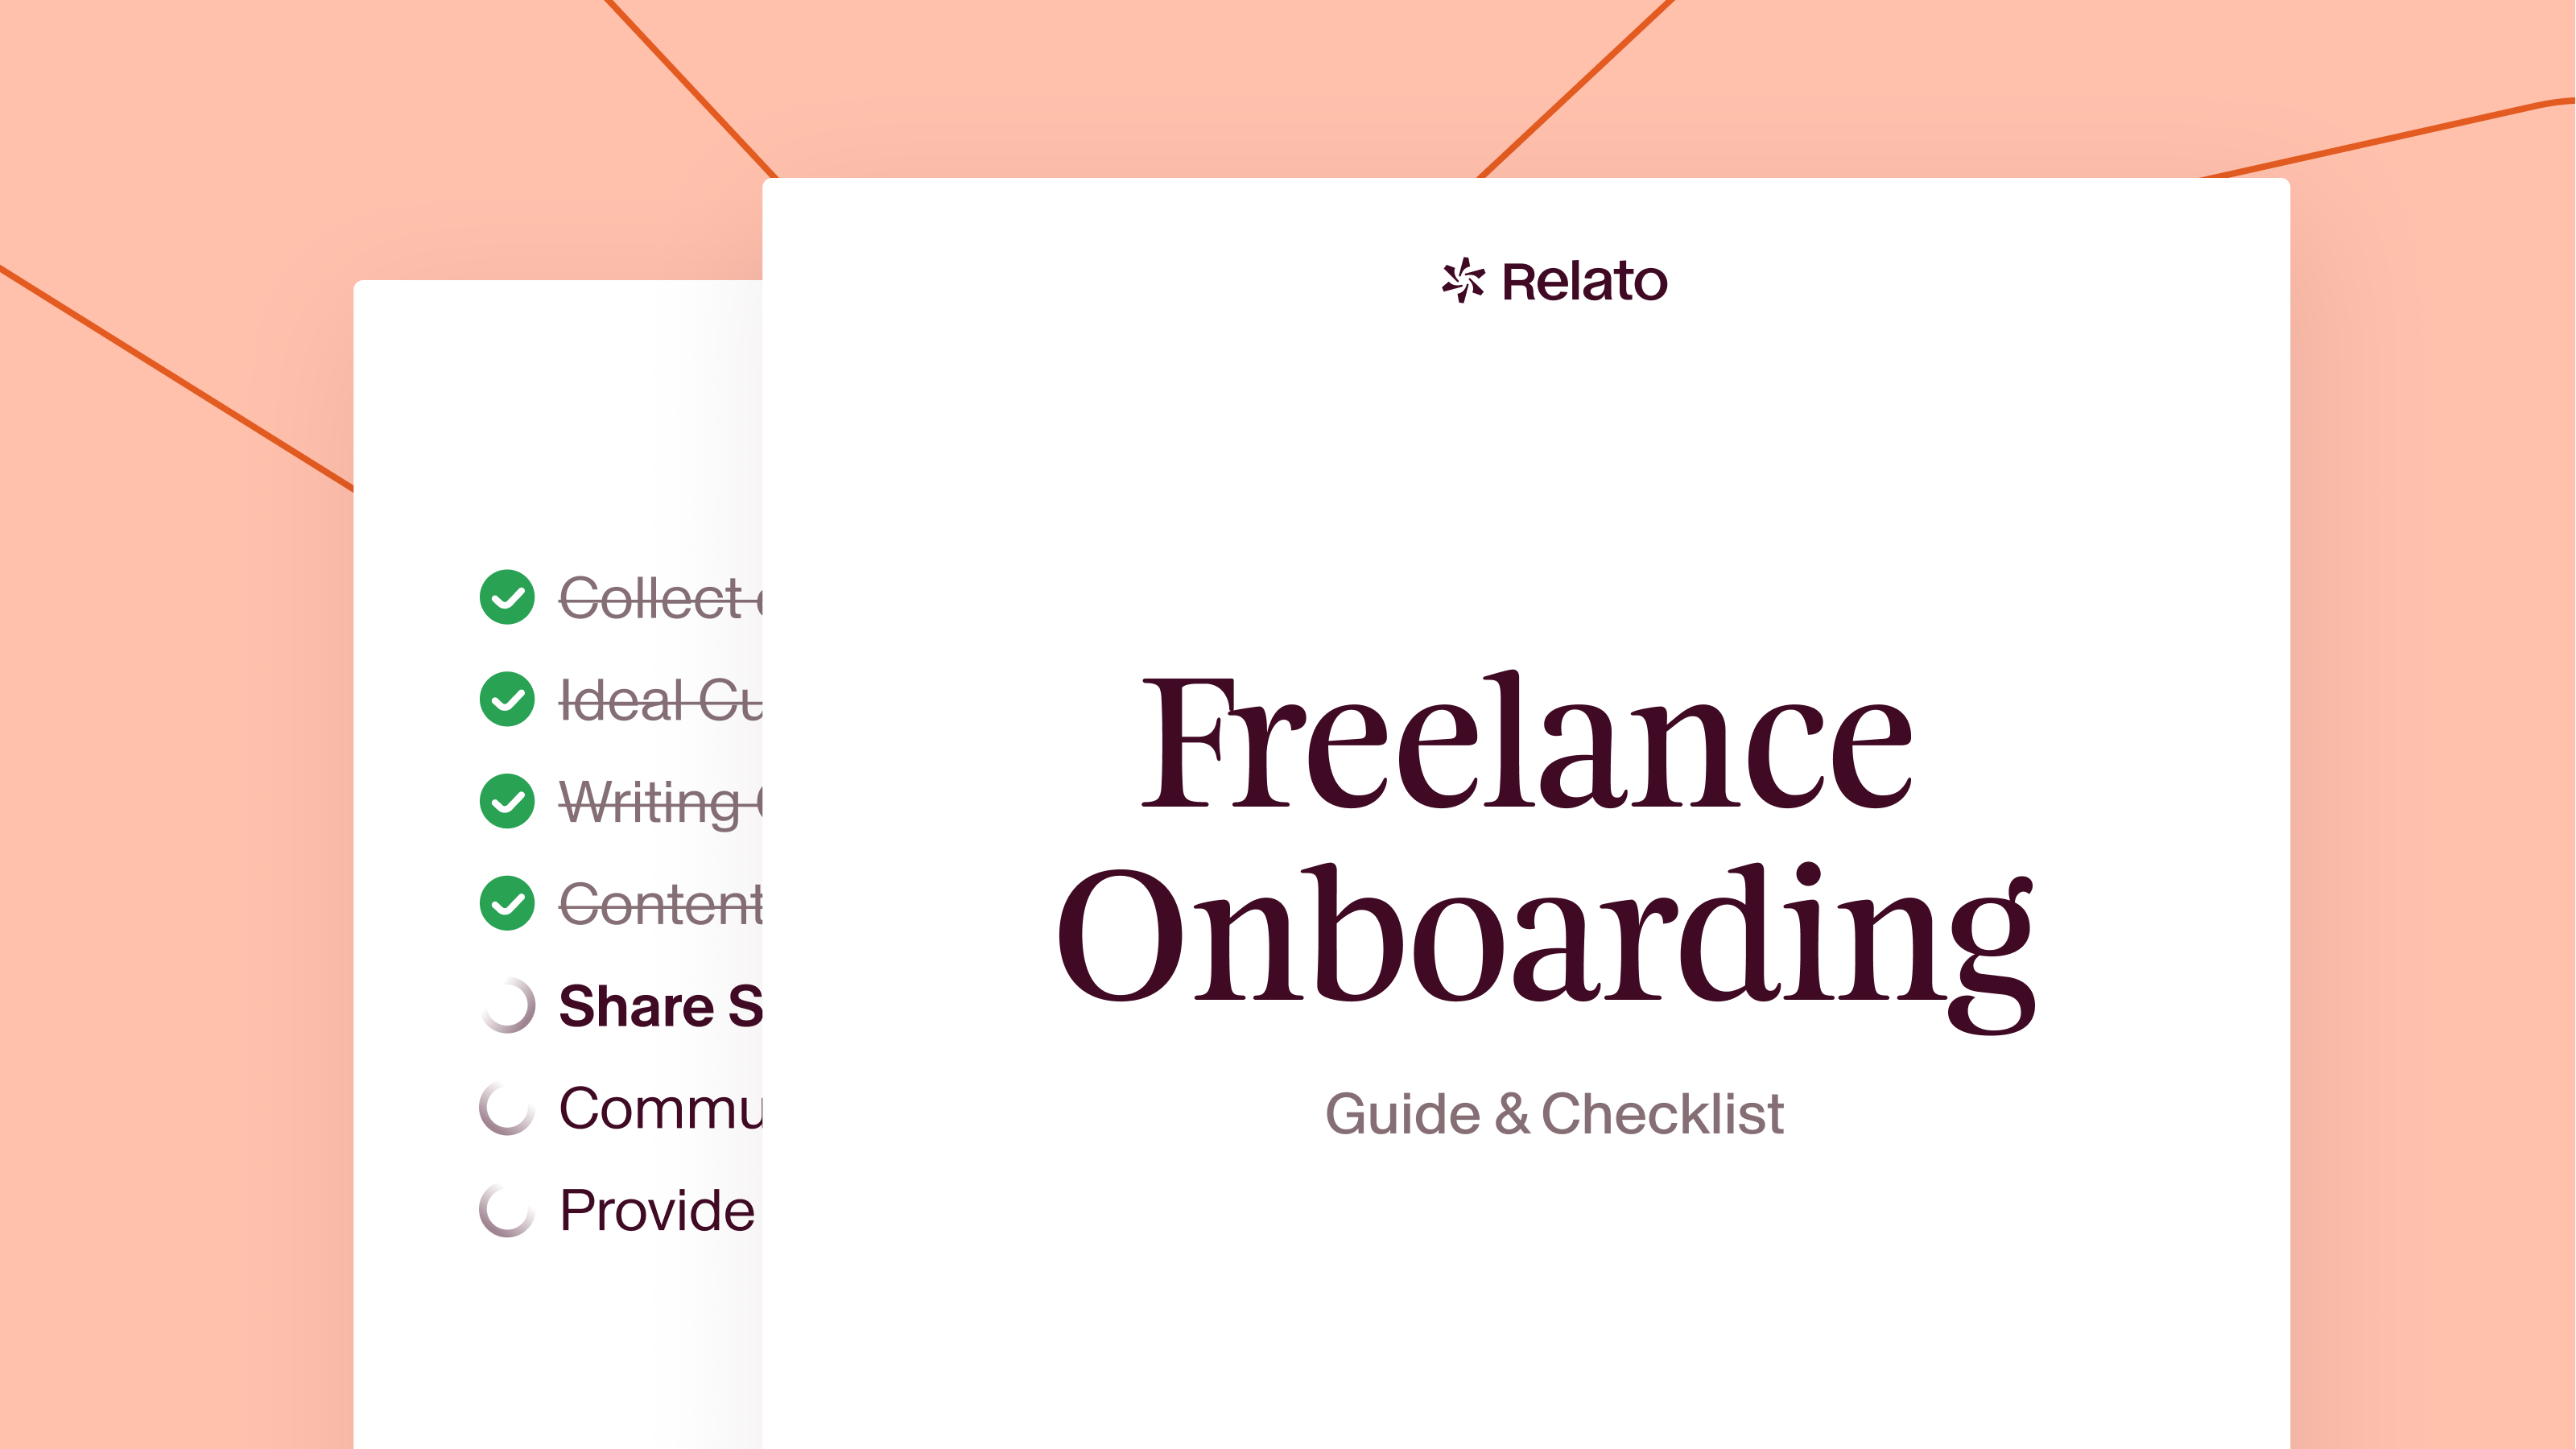 Cover image for blog post "Freelance Onboarding"